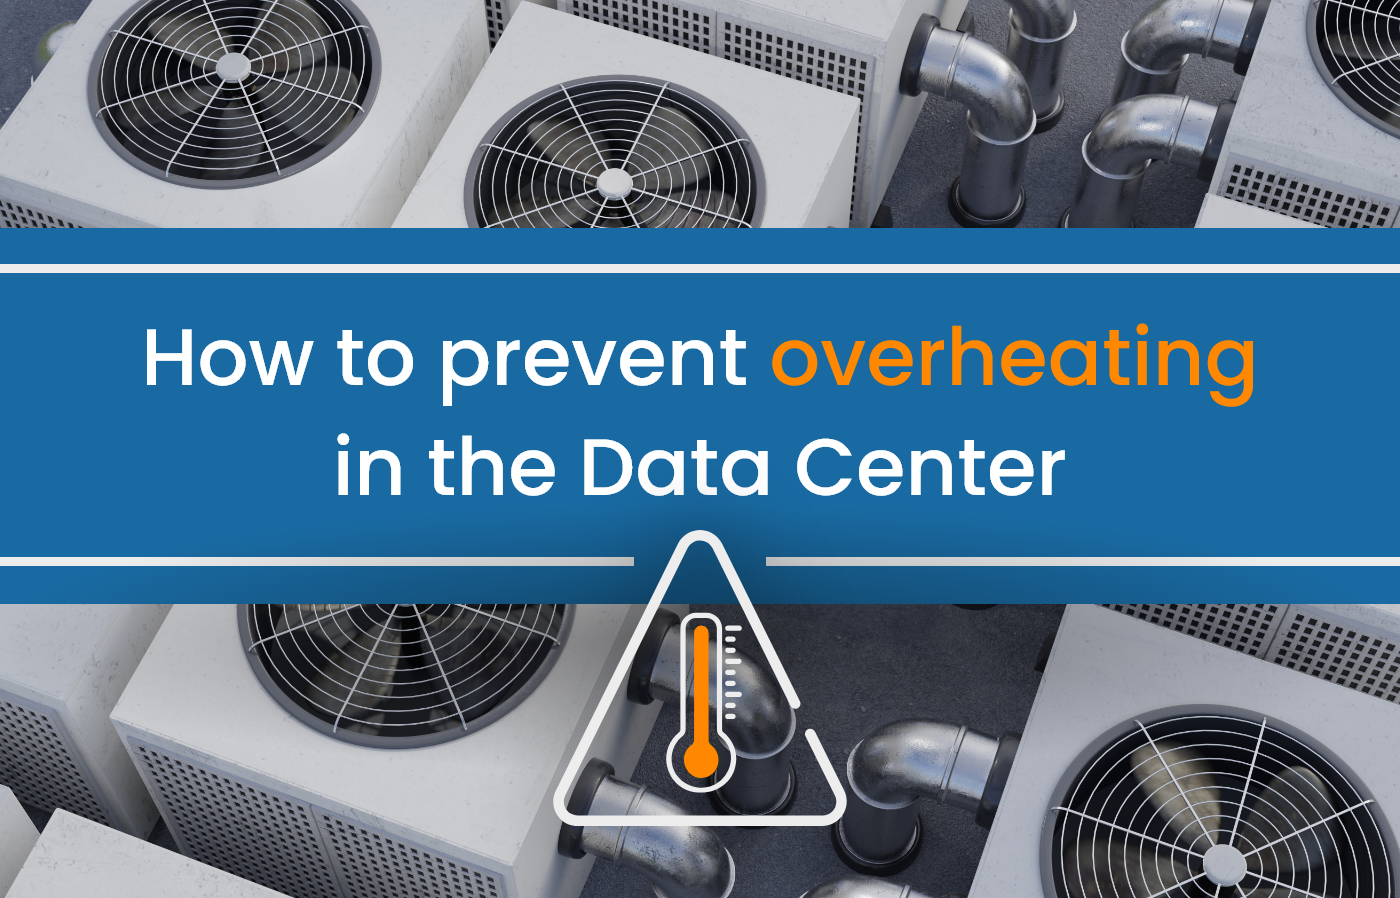 How to prevent overheating in the data center